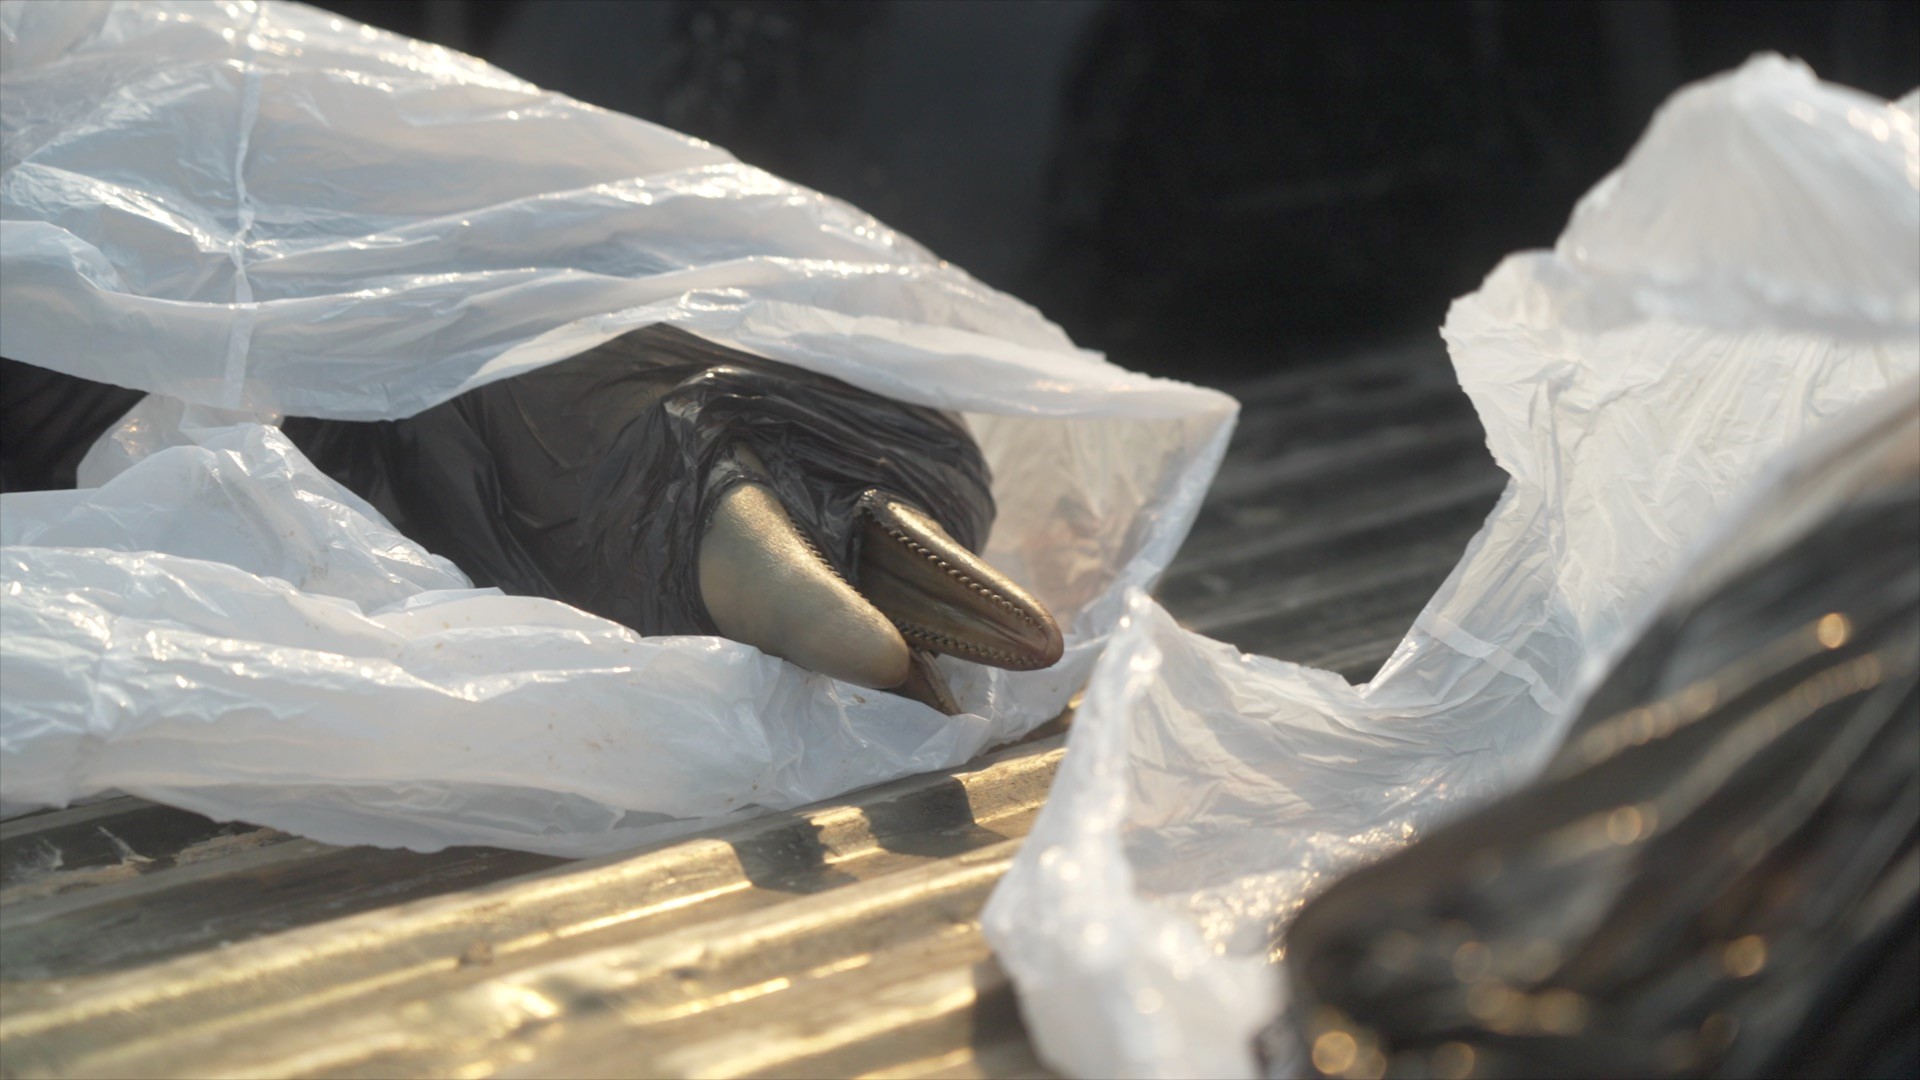 A dead dolphin in a bag to be taken away for research